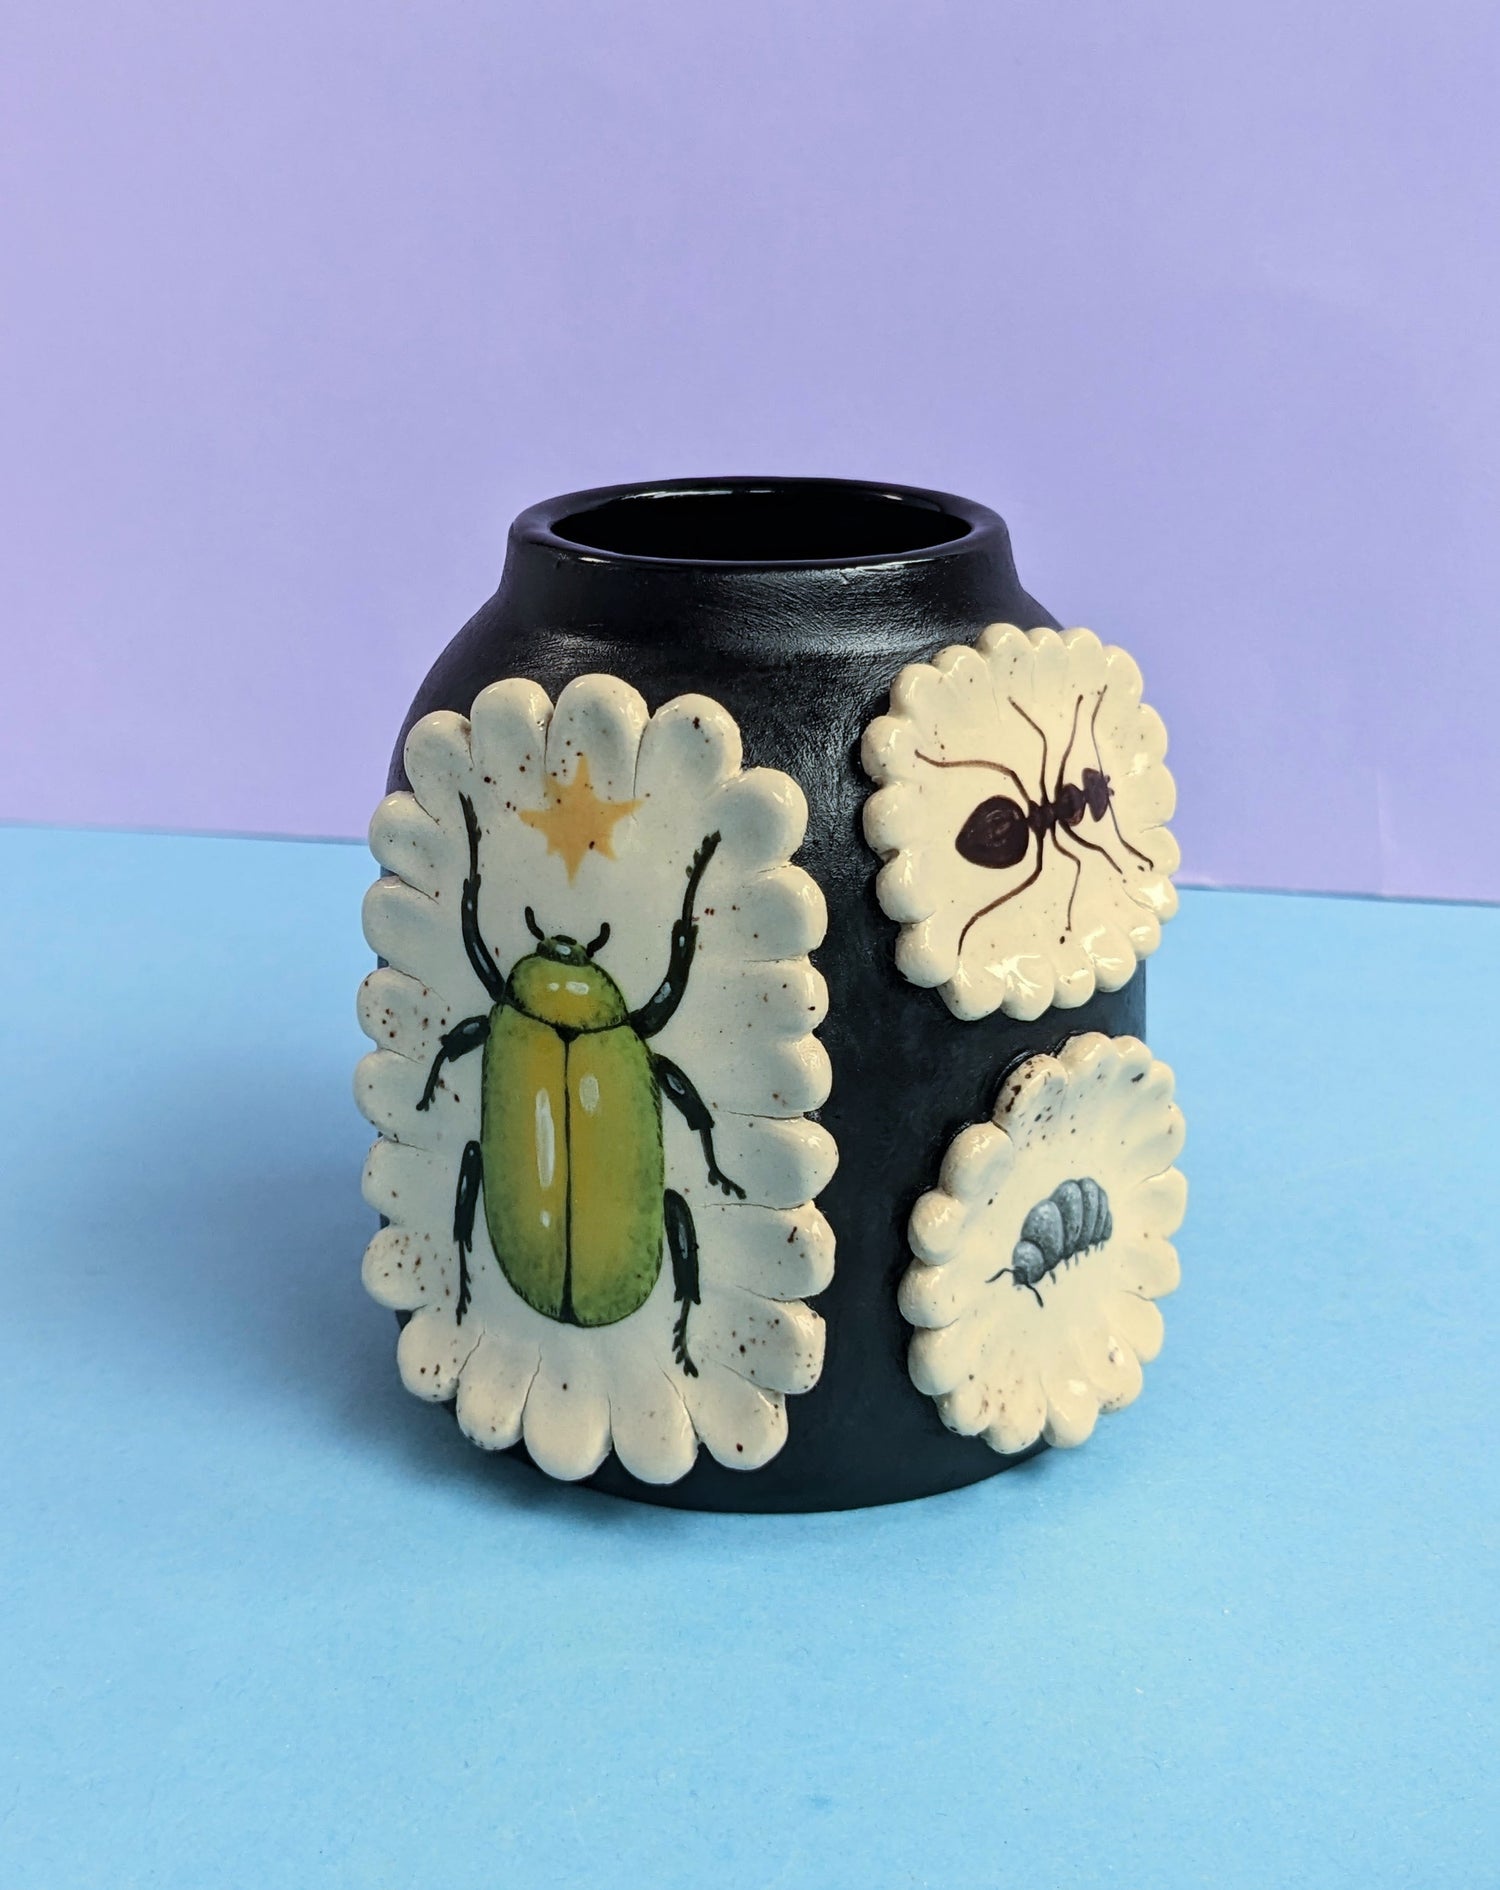 Black ceframic vase with white scalloped 3D design. Decorated with bug illustrations 